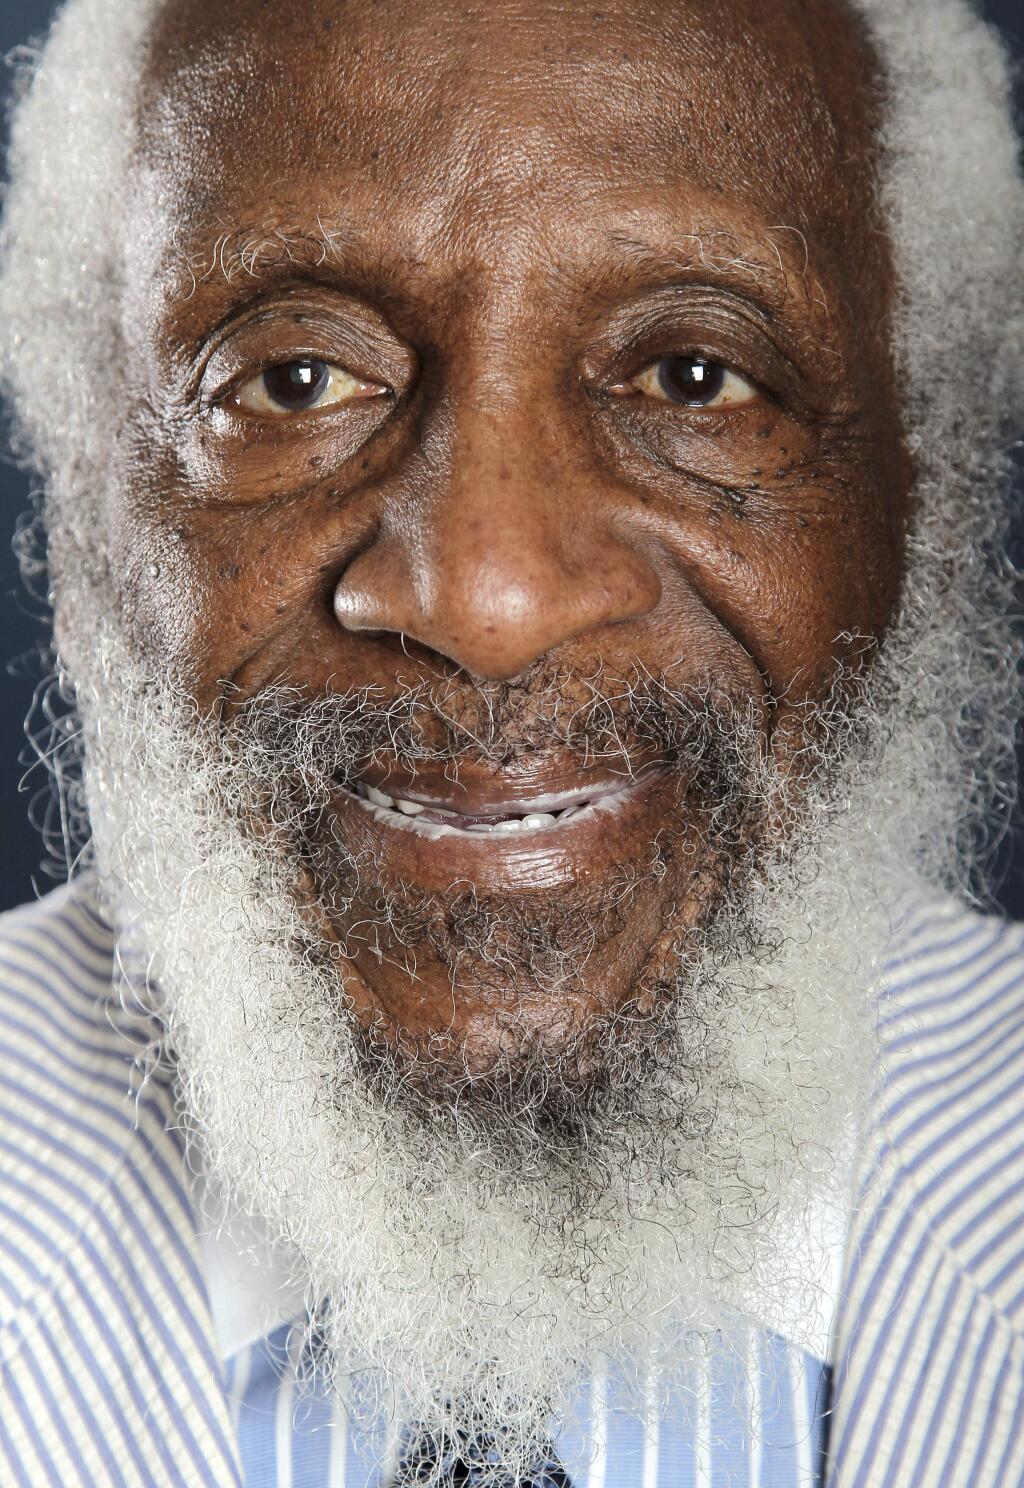 FILE - In this July 21, 2012 file photo, comedian and activist Dick Gregory poses for a portrait during the PBS TCA Press Tour in Beverly Hills, Calif. Gregory, the comedian and activist and who broke racial barriers in the 1960s and used his humor to spread messages of social justice and nutritional health, has died. He was 84. Gregory died late Saturday, Aug. 19, 2017, in Washington, D.C. after being hospitalized for about a week, his son Christian Gregory told The Associated Press. He had suffered a severe bacterial infection. (Photo by Matt Sayles/Invision/AP, File)